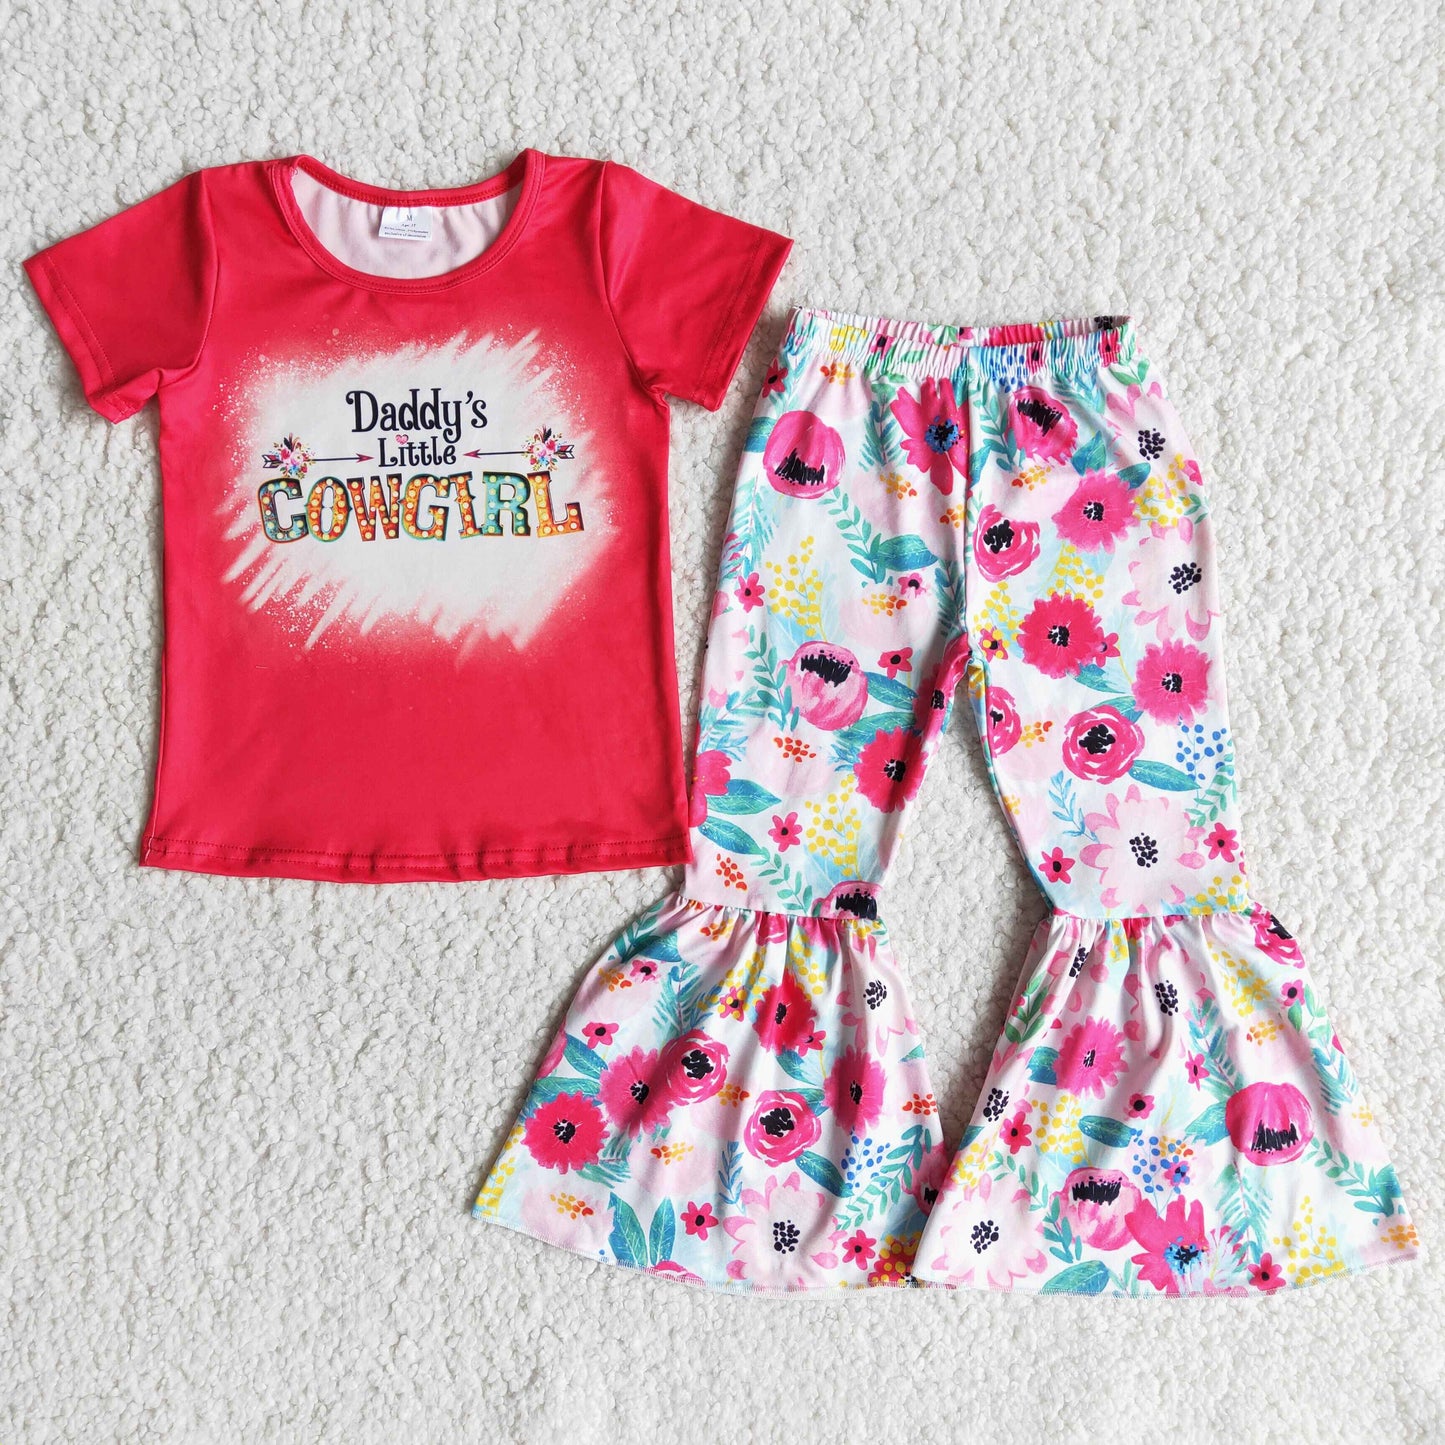 daddy's little cowgirl floral bells outfit